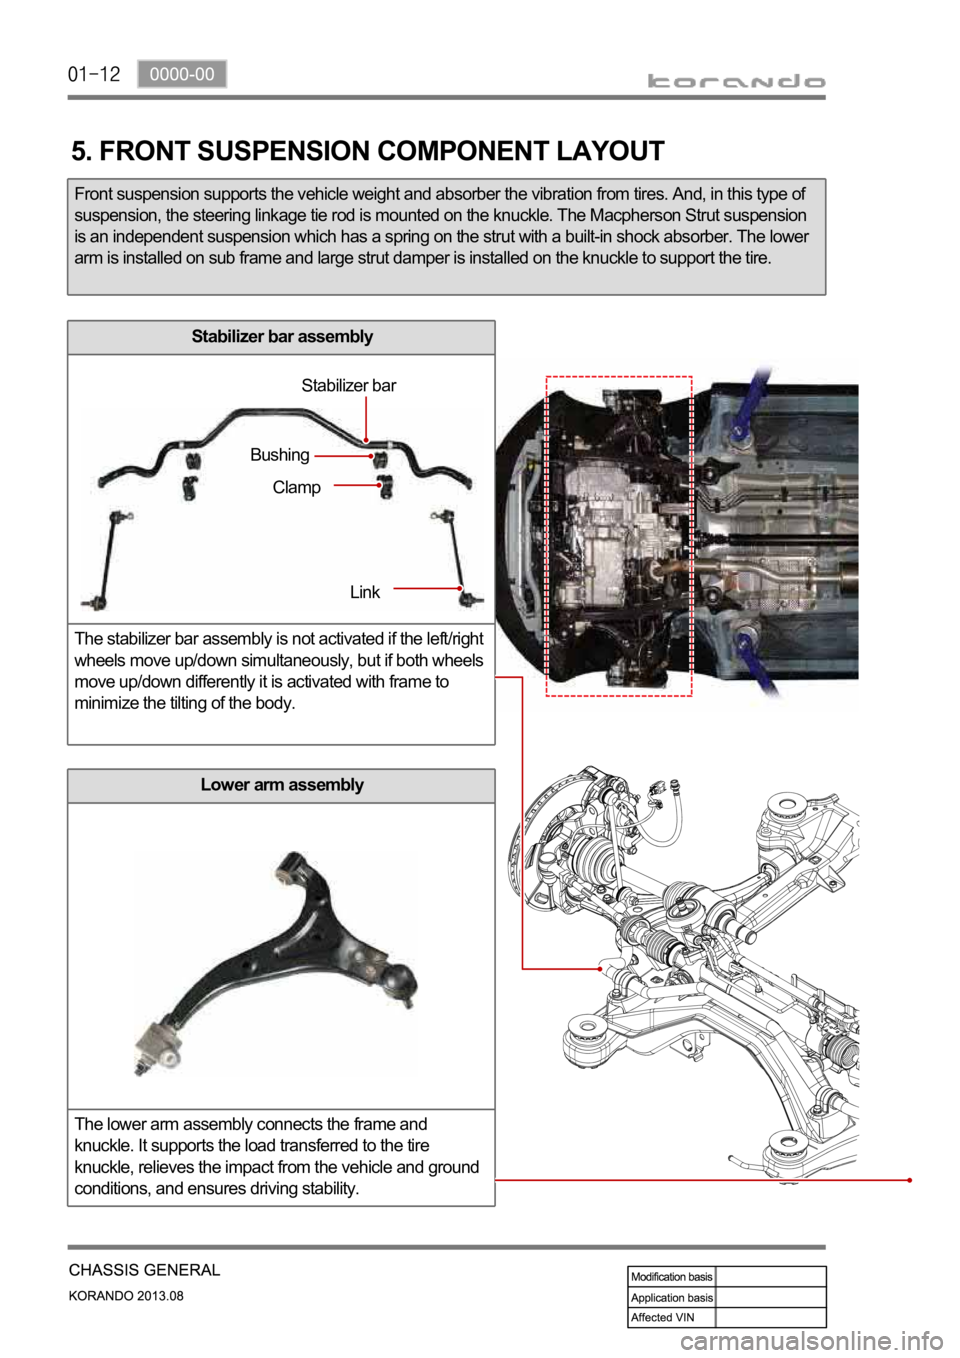 SSANGYONG KORANDO 2013  Service Manual Stabilizer bar assembly
The stabilizer bar assembly is not activated if the left/right 
wheels move up/down simultaneously, but if both wheels 
move up/down differently it is activated with frame to 
